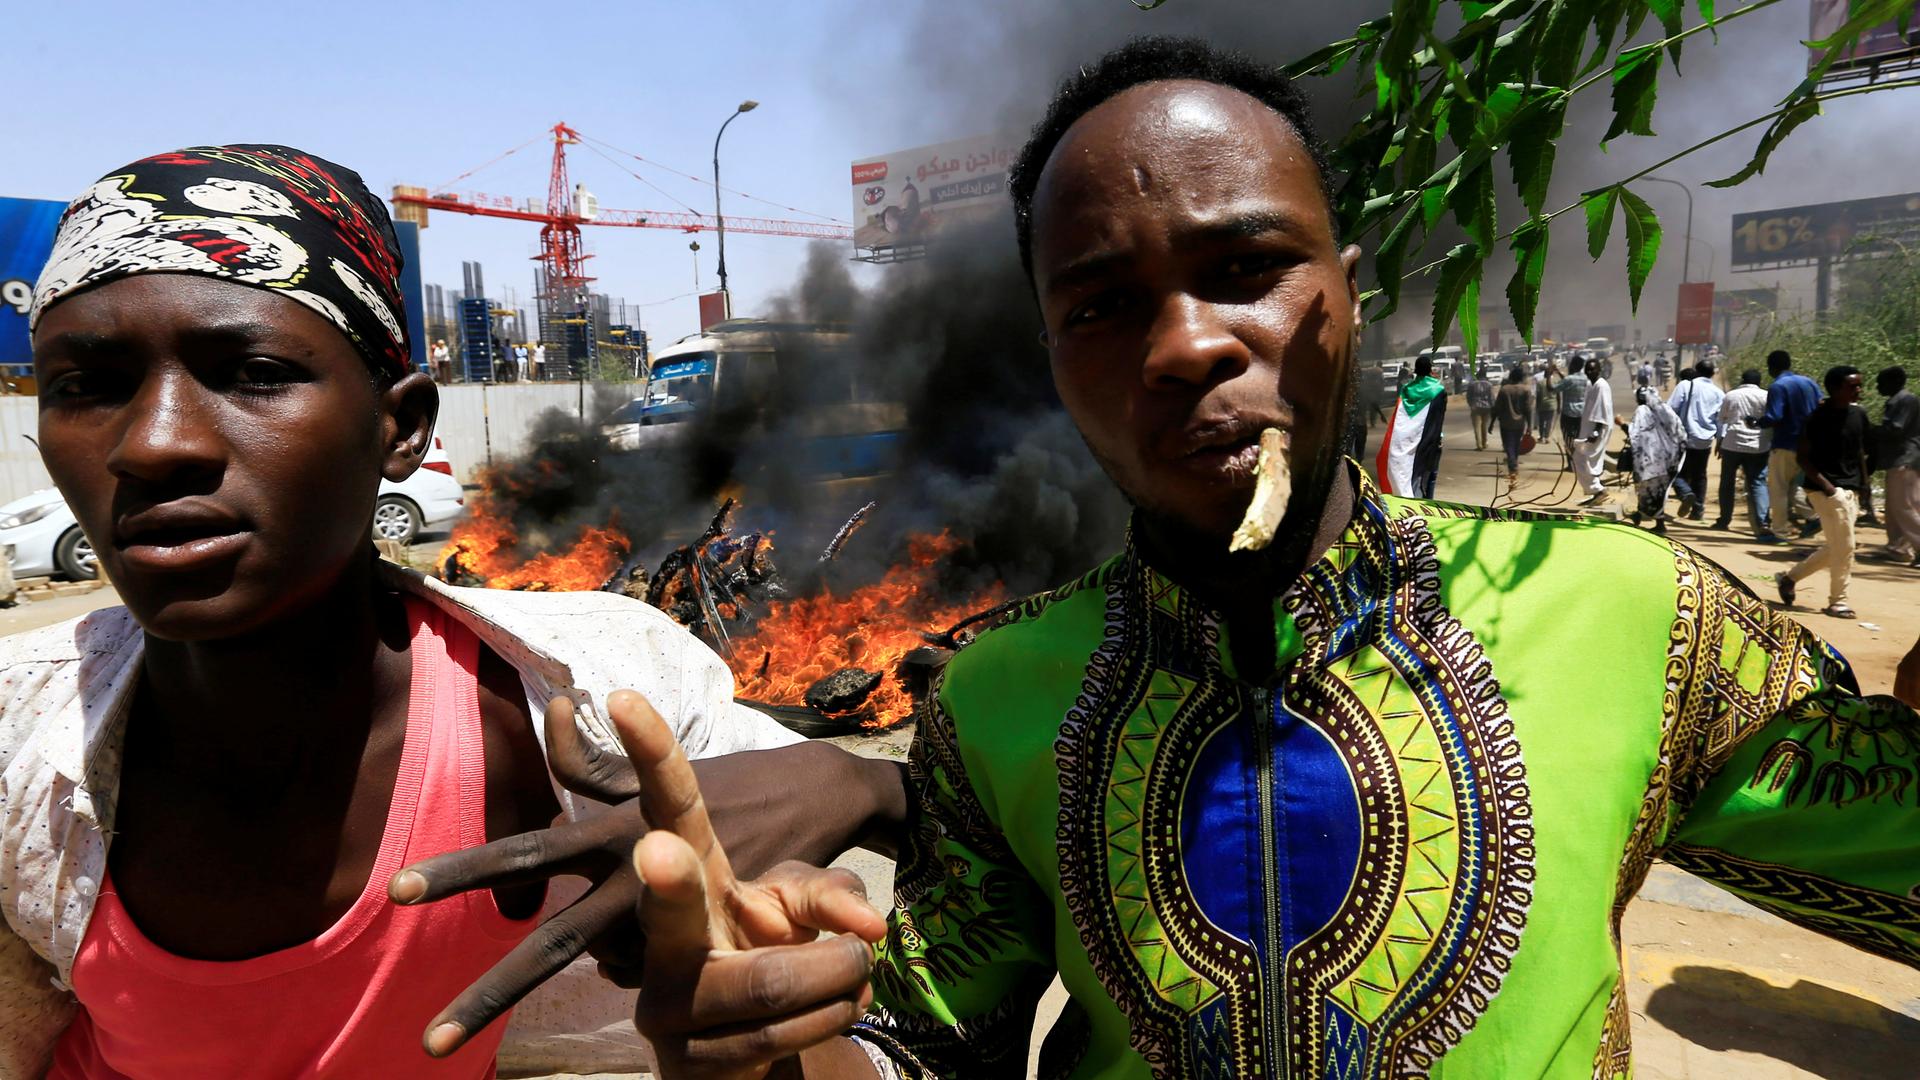 Two Sudanese men give a two-finger salute to the camera. Behind them a pile of tires is burning. 